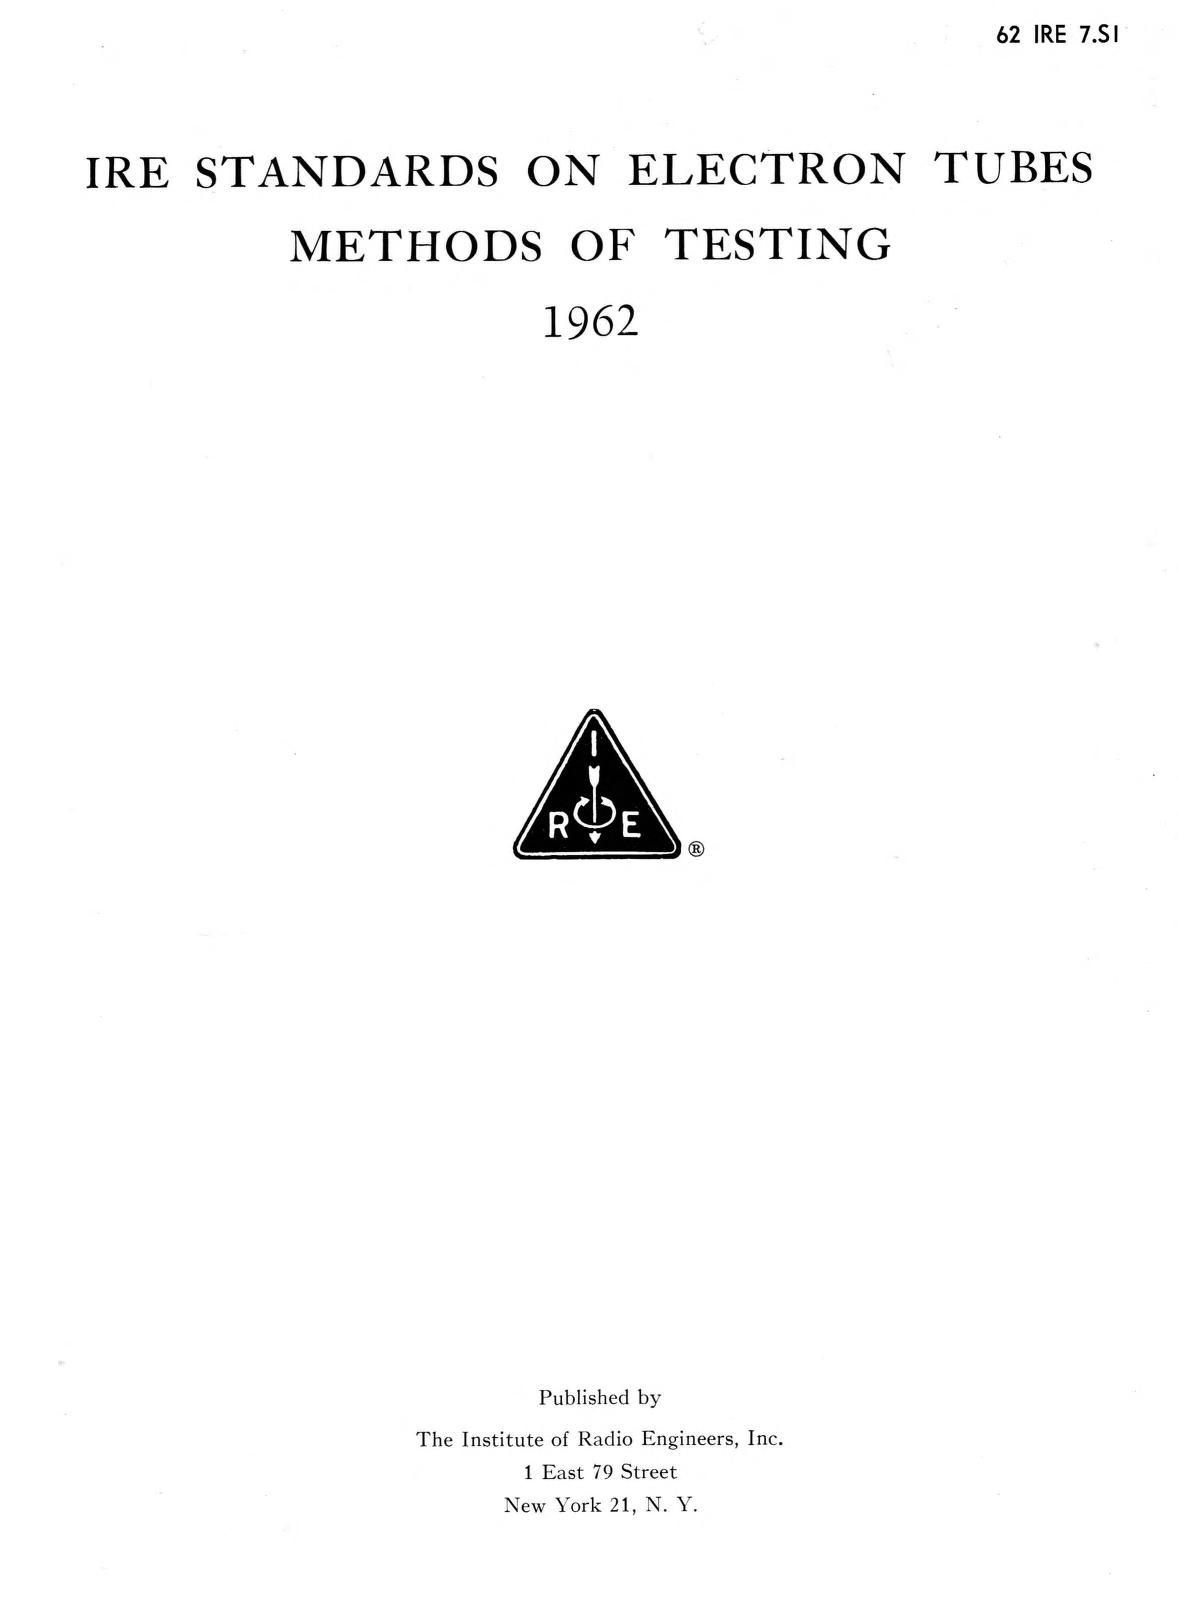 IRE 1962 IRE Standards On Electron Tubes Of Testing IRE 7. SI : Free Download, Borrow, and Streaming : Internet Archive